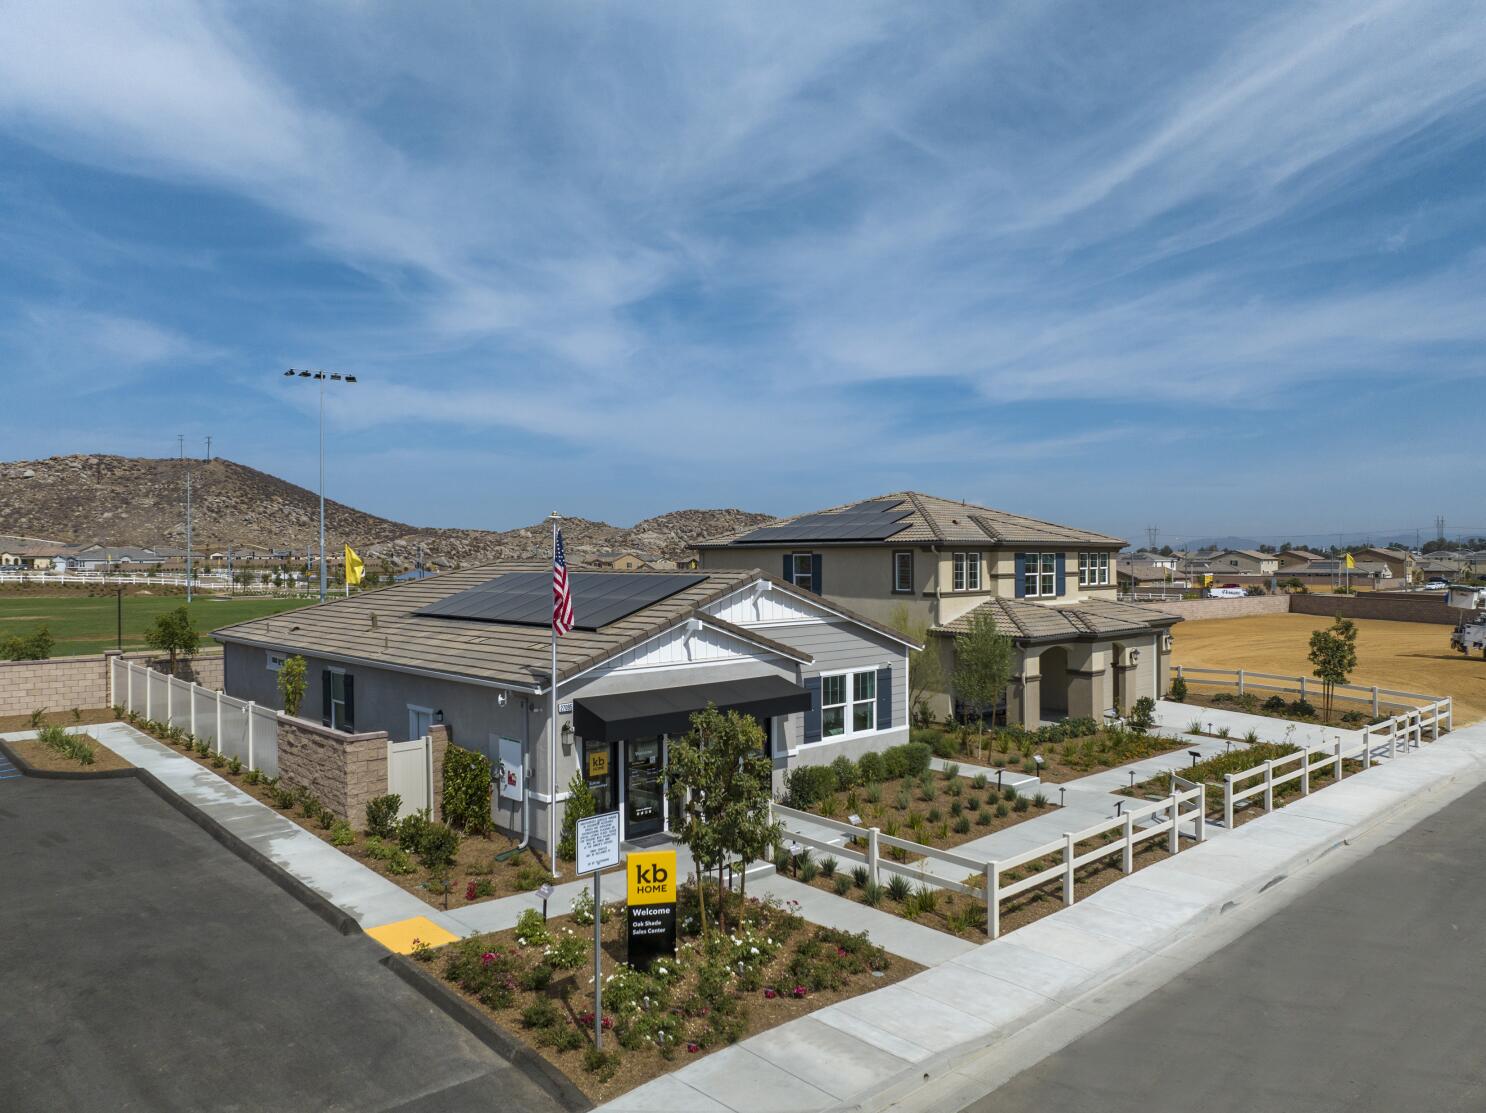 New Homes For Sale in San Diego, CA by KB Home